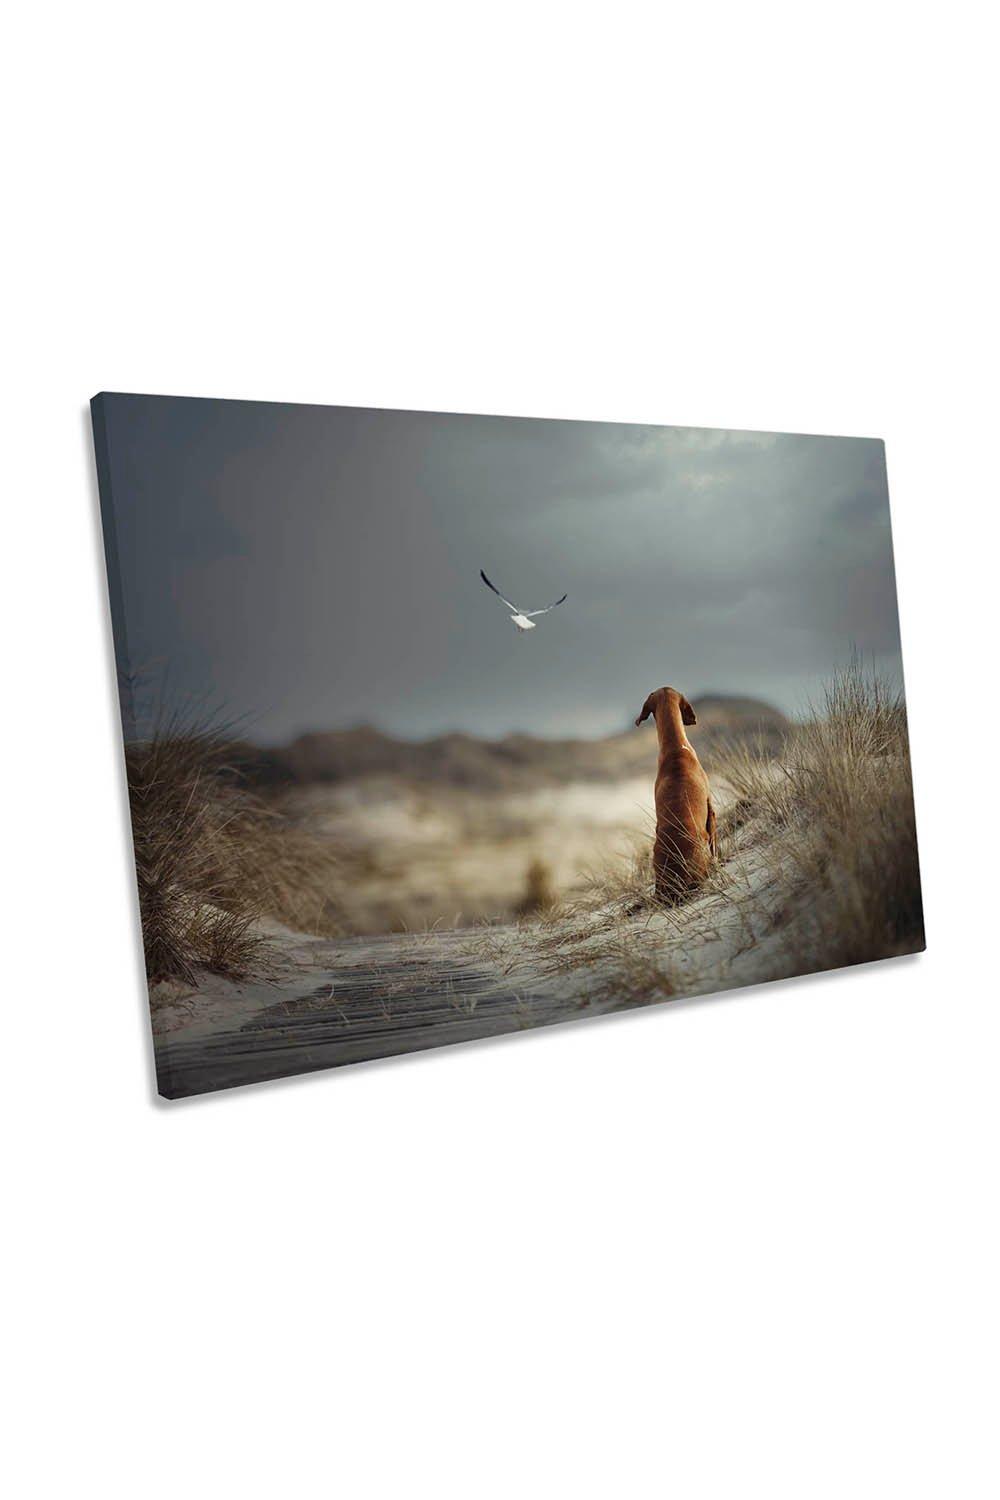 Freedom Seagull Dog Beach Canvas Wall Art Picture Print